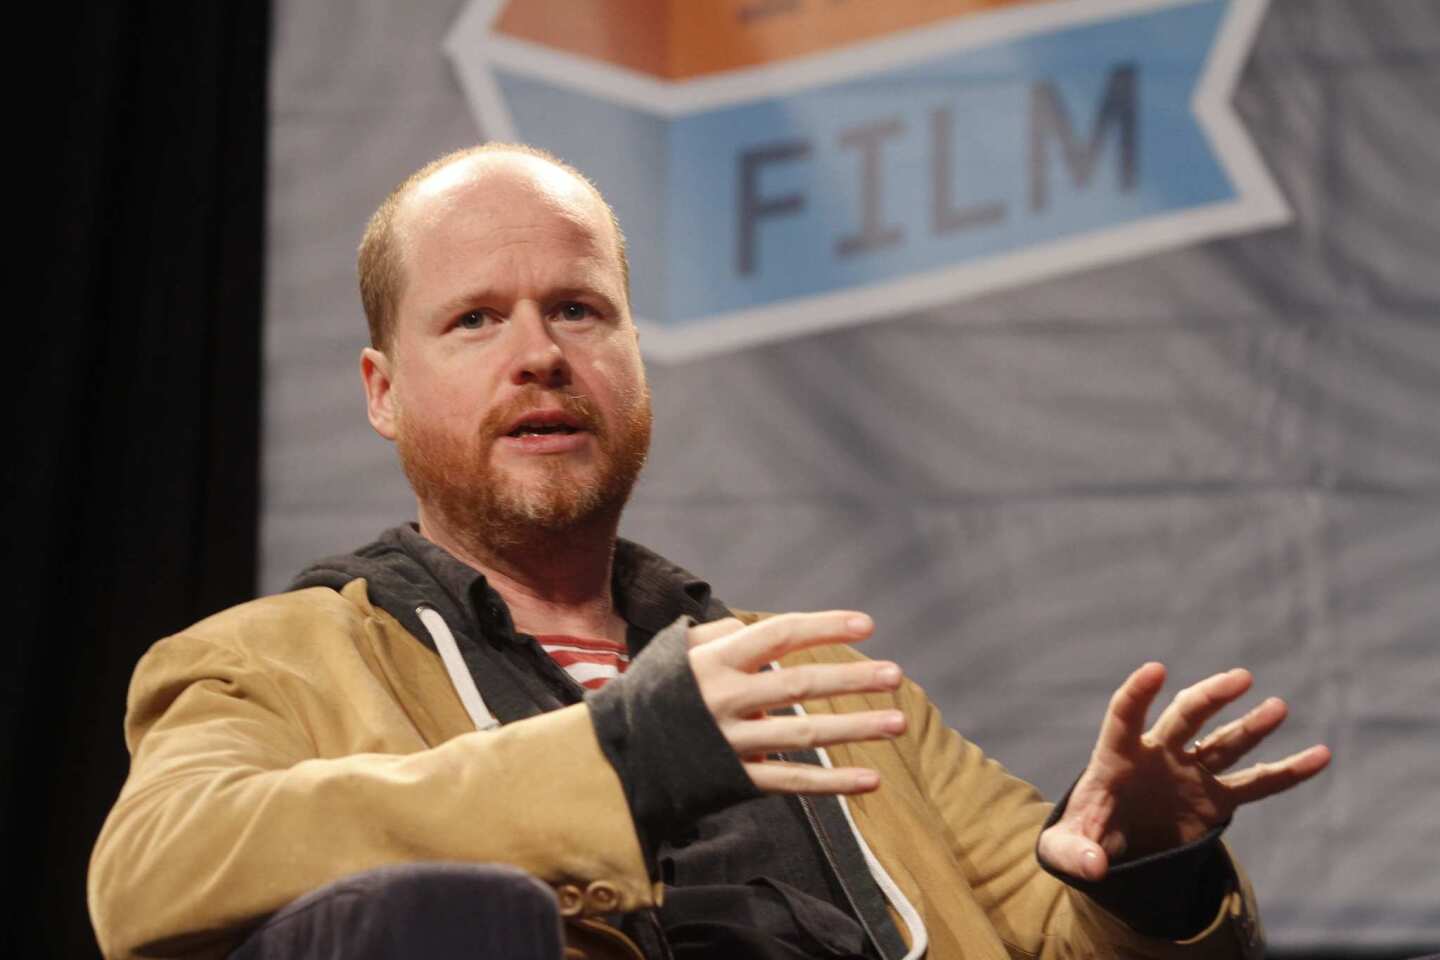 "The Cabin in the Woods" writer Joss Whedon gives a keynote speech at the SXSW Film fest.